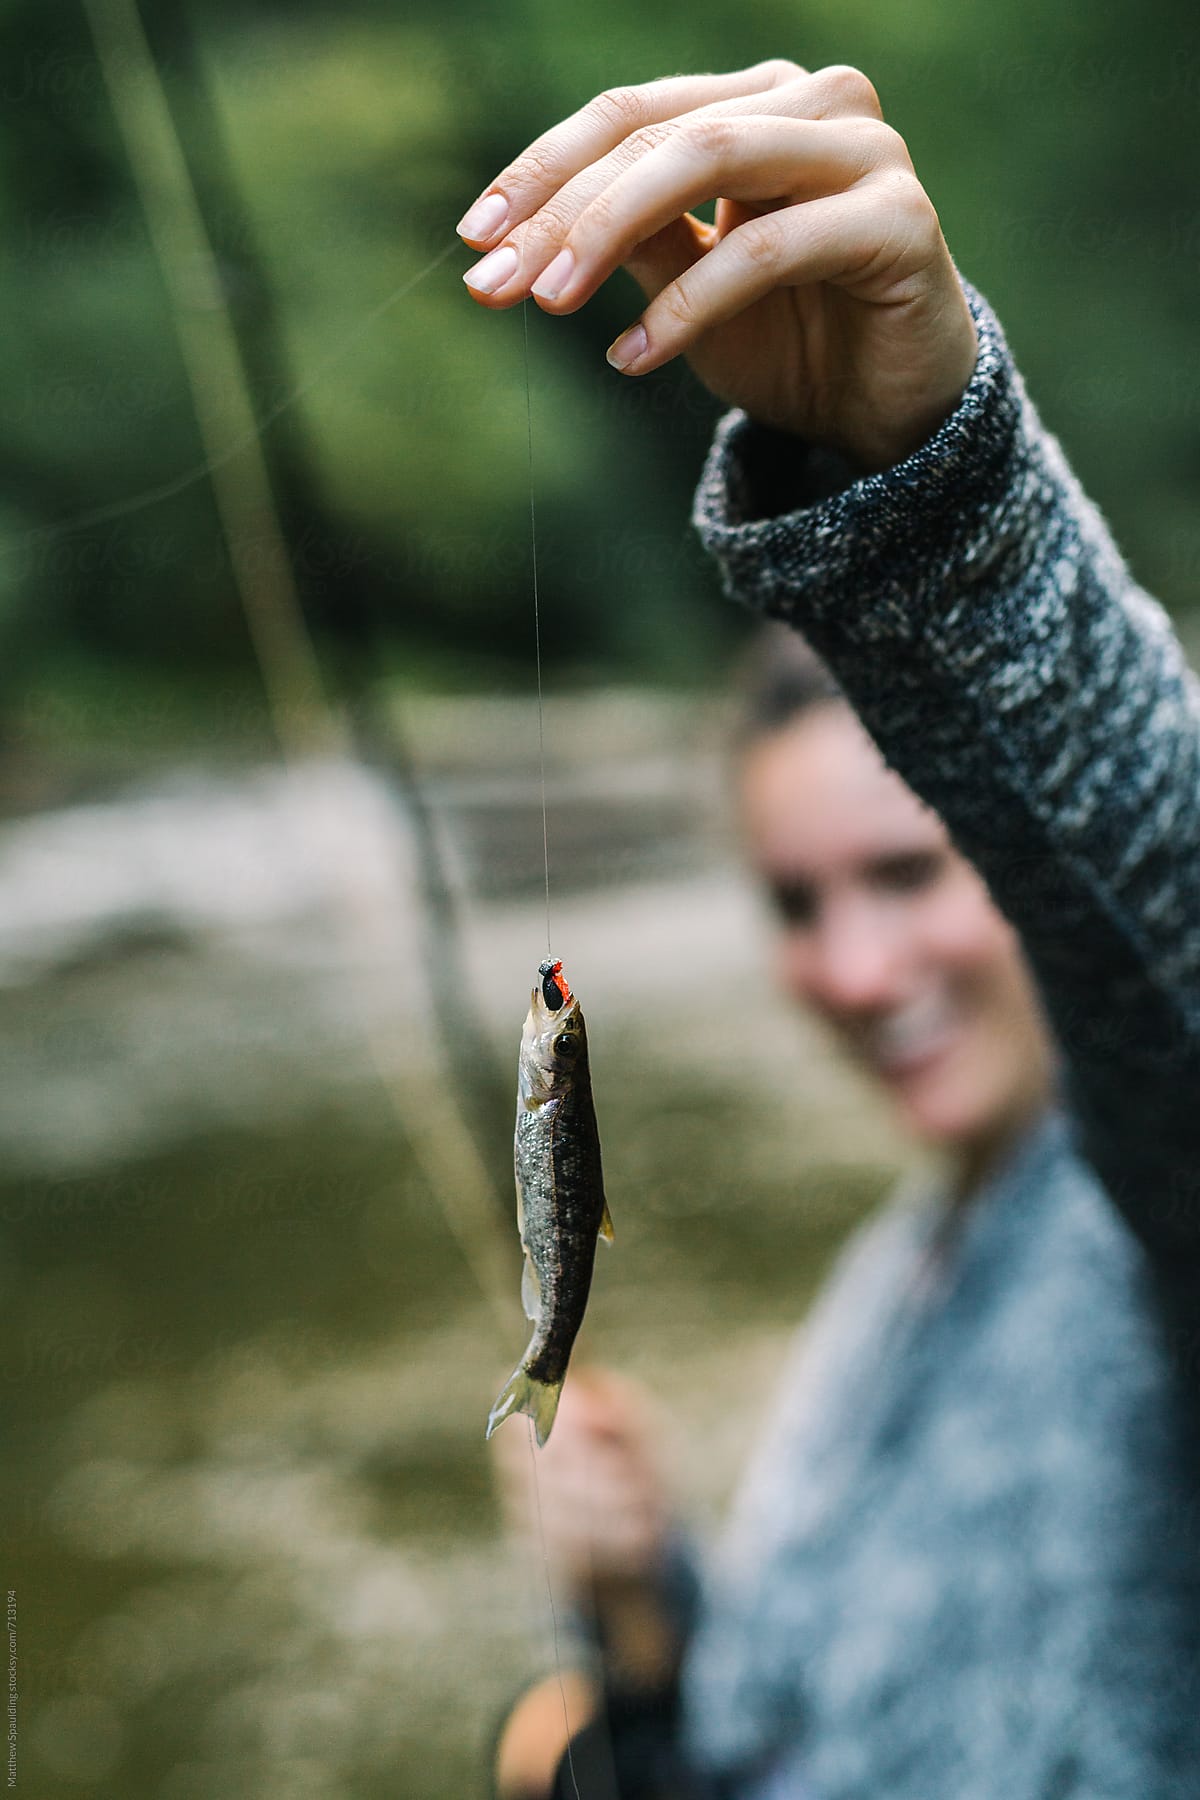 Woman Smiling With Very Small Fish Caught On Fly-fishing Line by